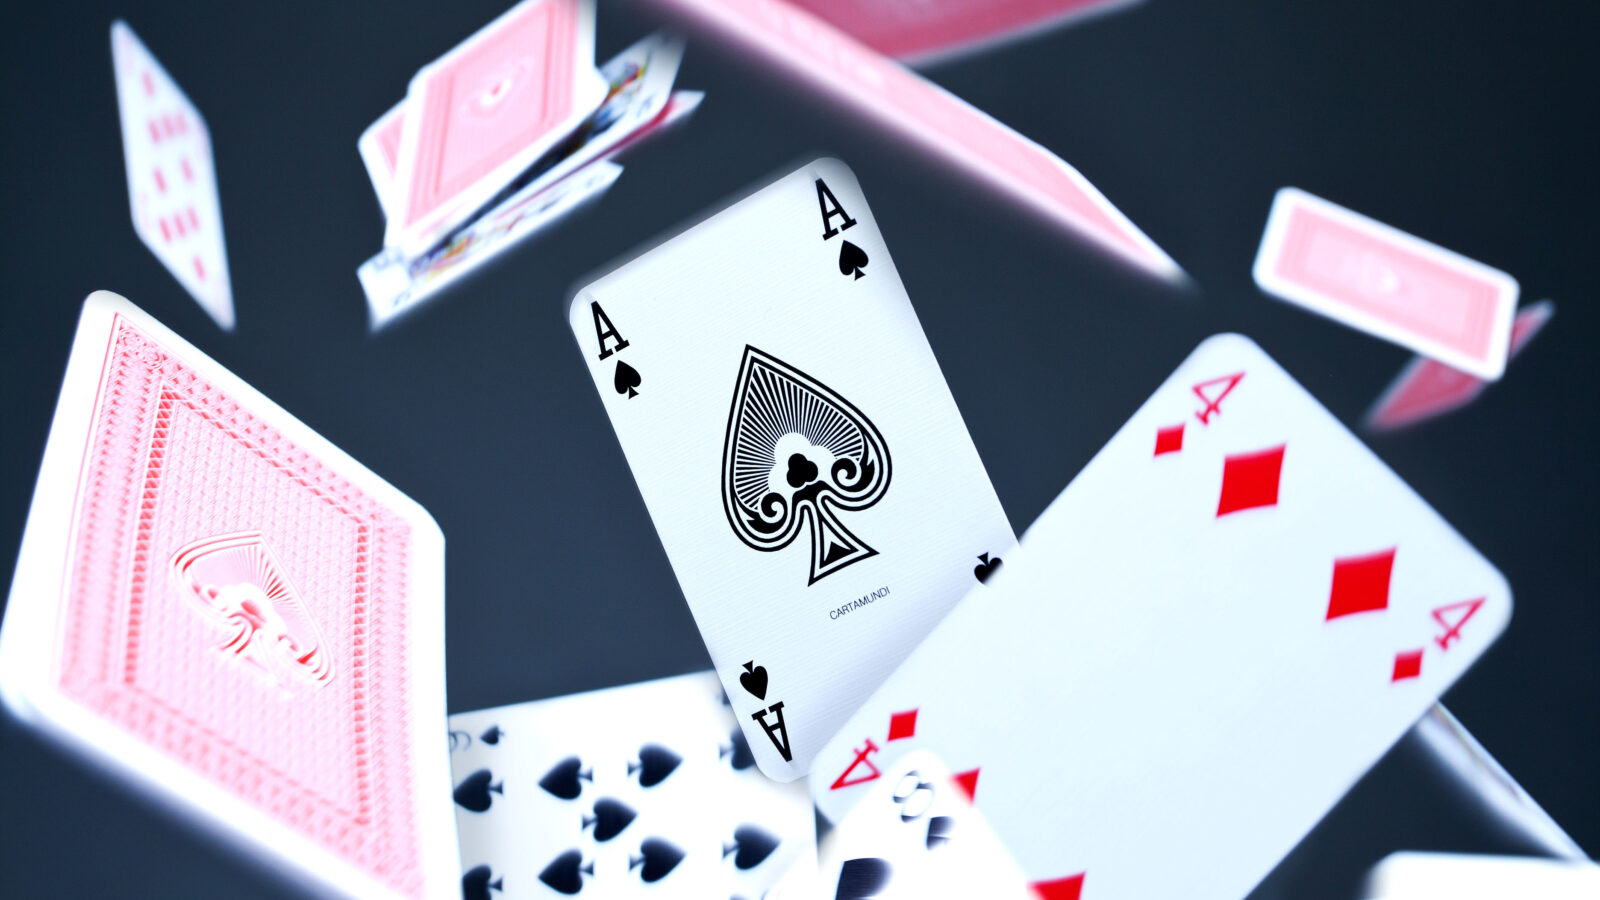 A photograph of falling playing cards